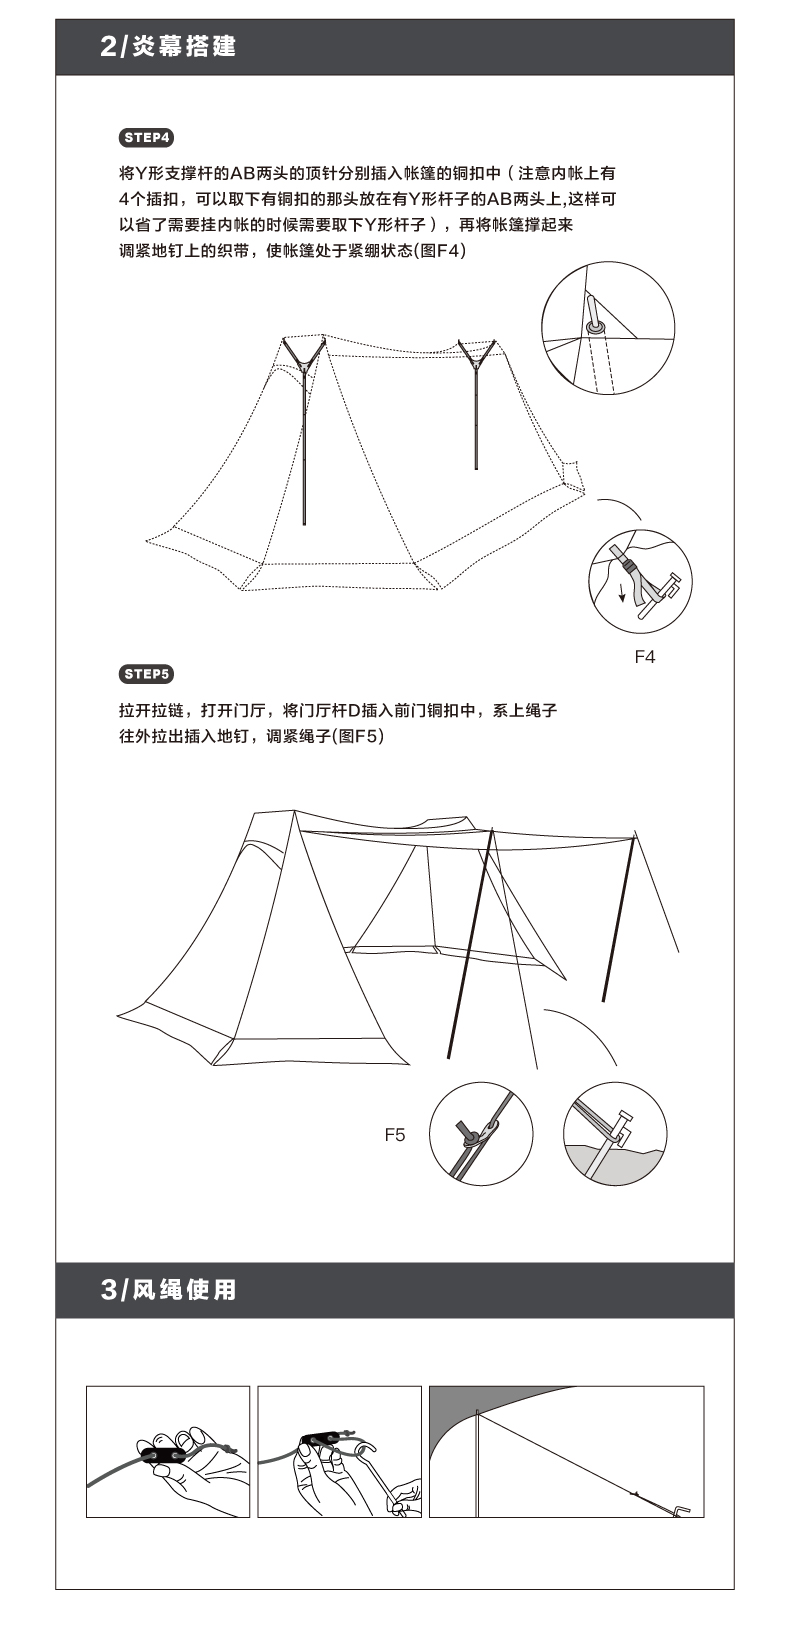 Cheap Goat Tents Tc Cotton Luxury Aluminum Pole Outdoor Picnic Wilderness Camping Shelter Flame Curtain Fabric Light Army Green Tent